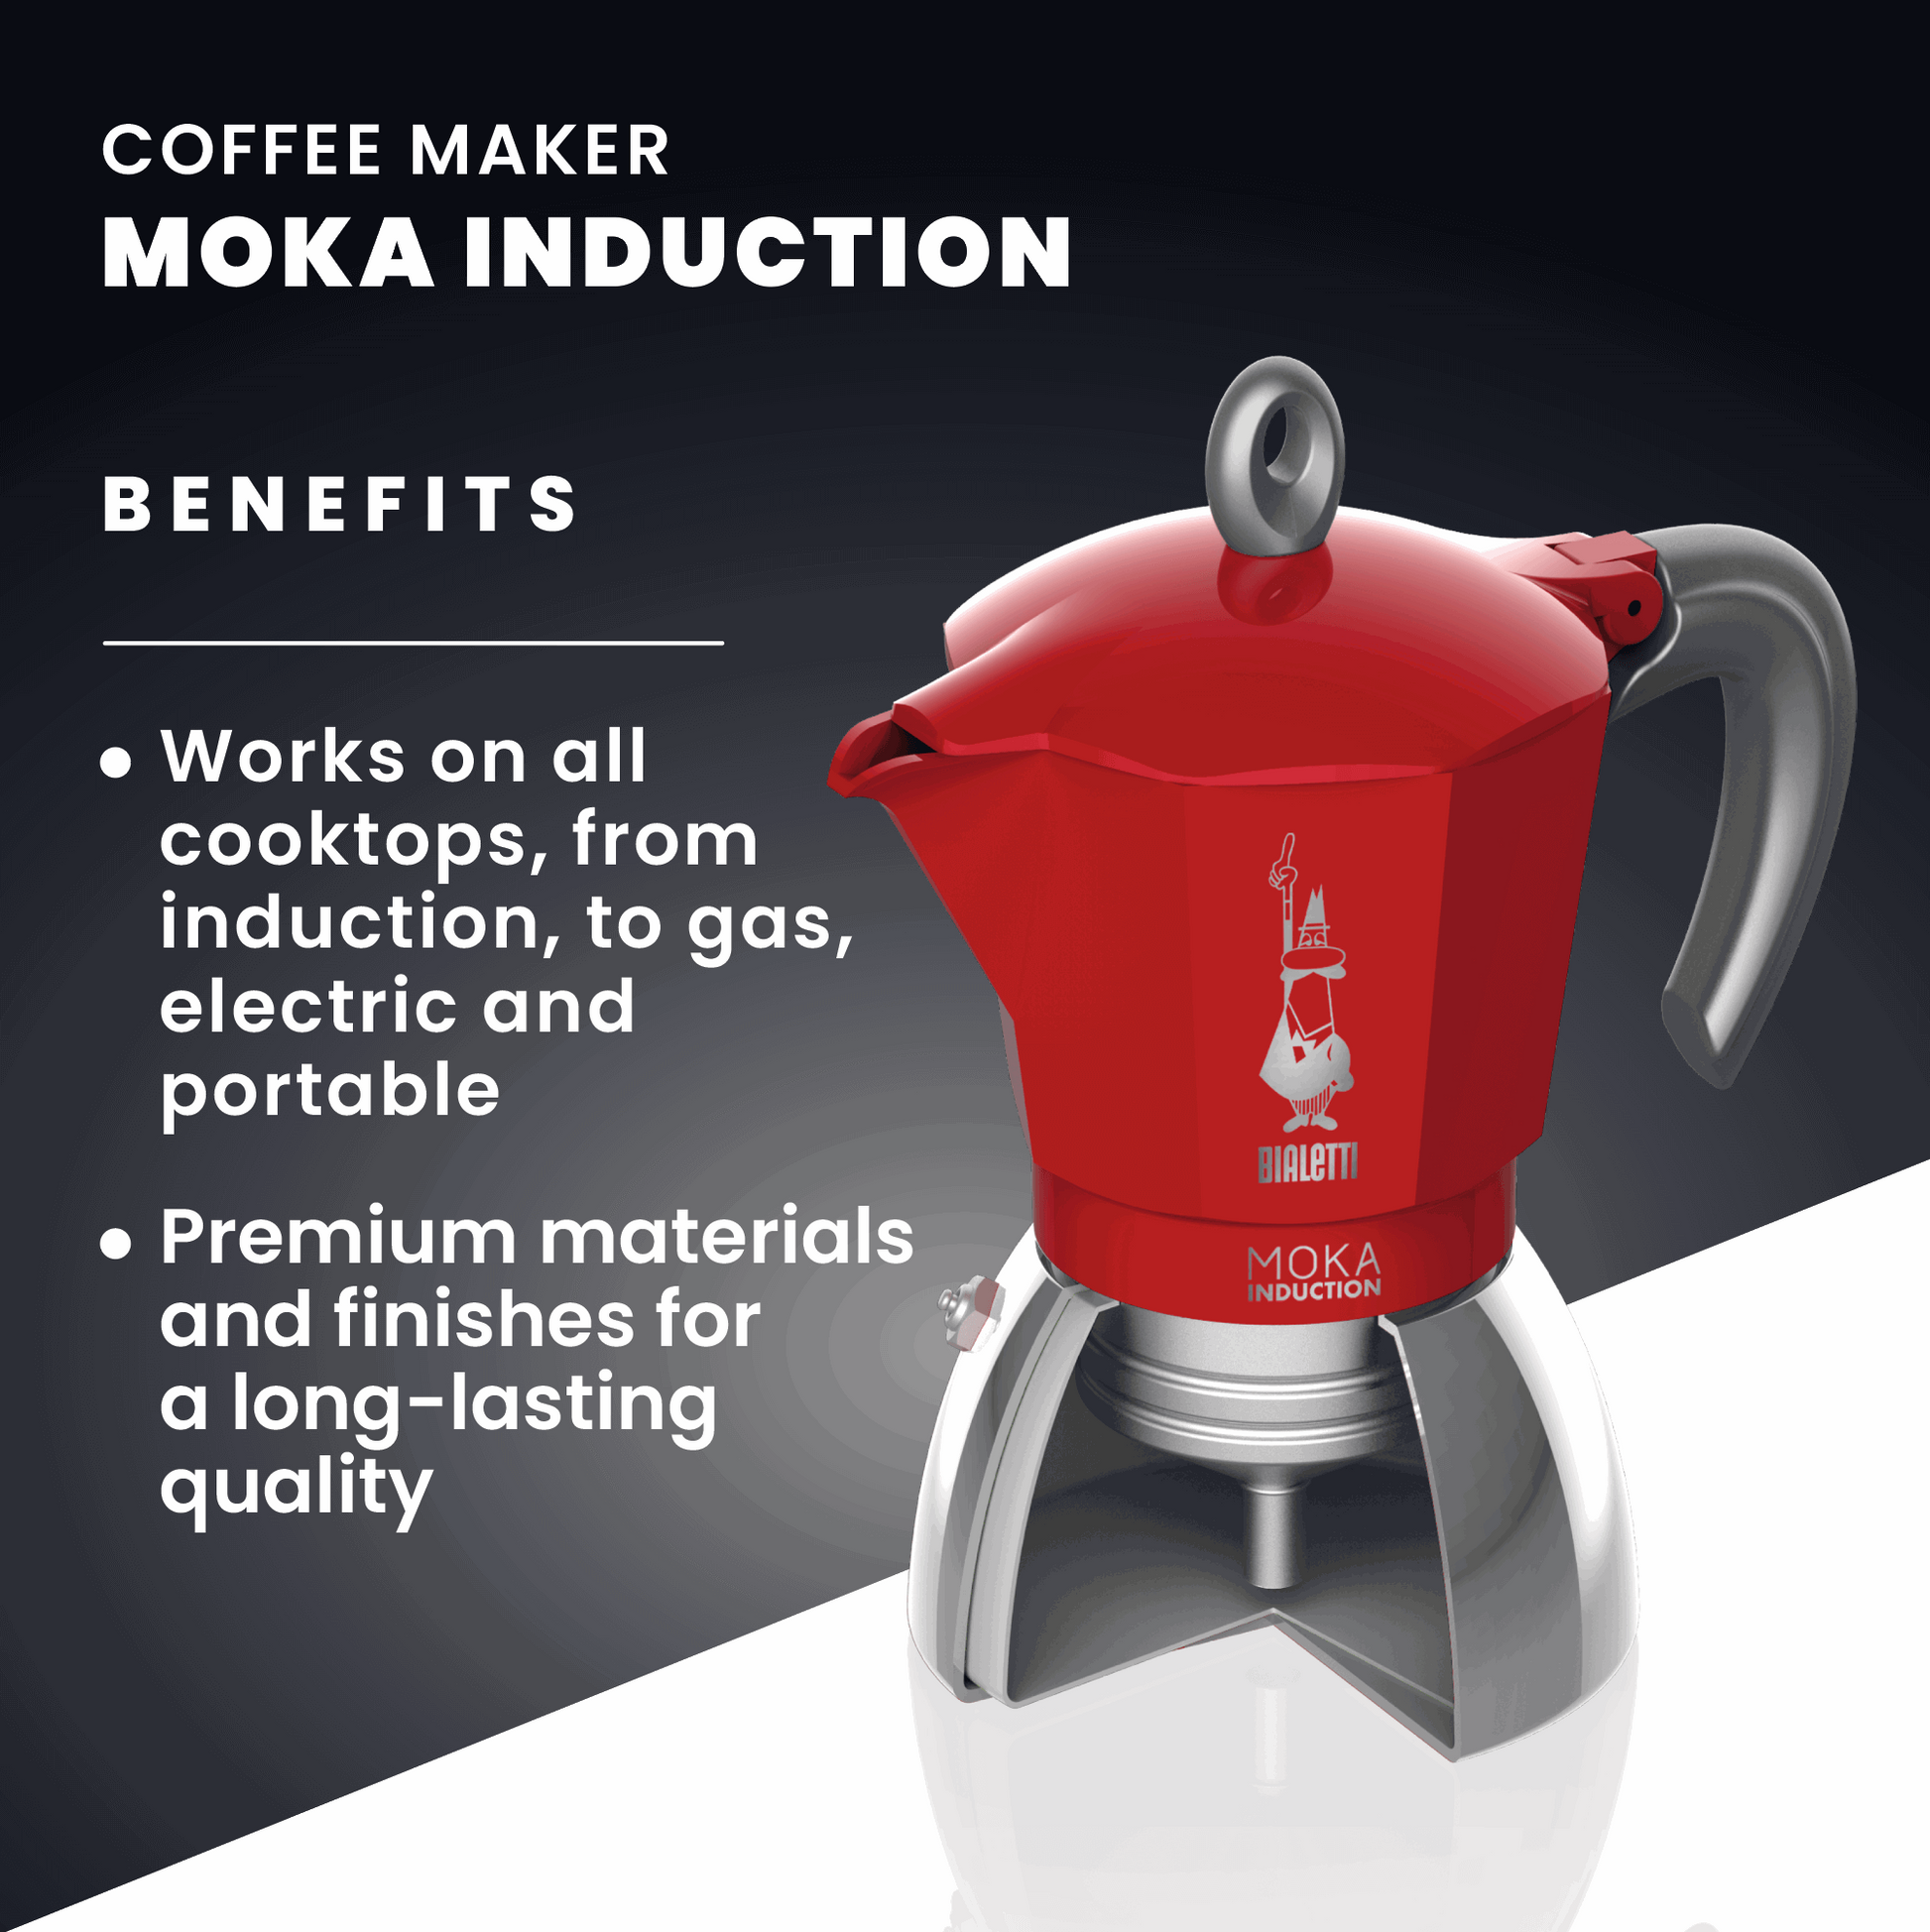 Red Moka Induction stovetop coffee maker benefits